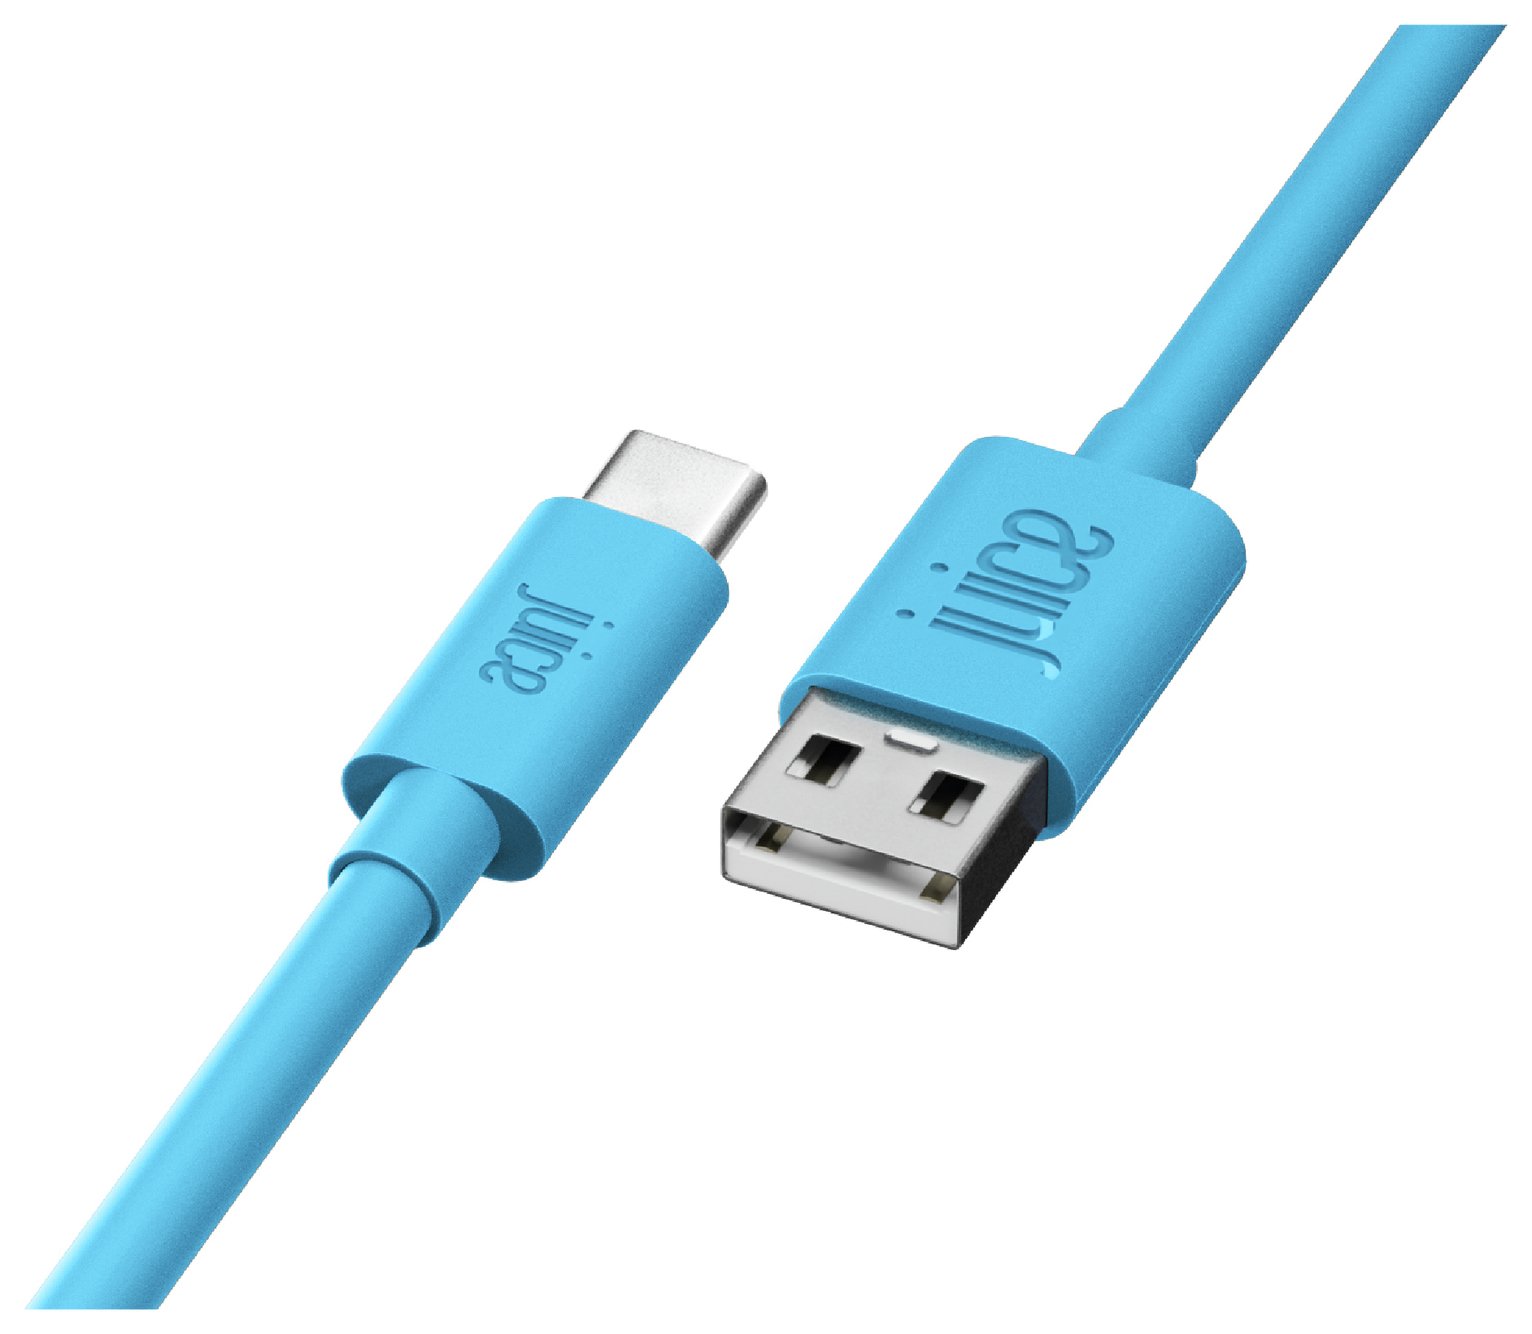 Juice USB to Type C 1m Charging Cable Review